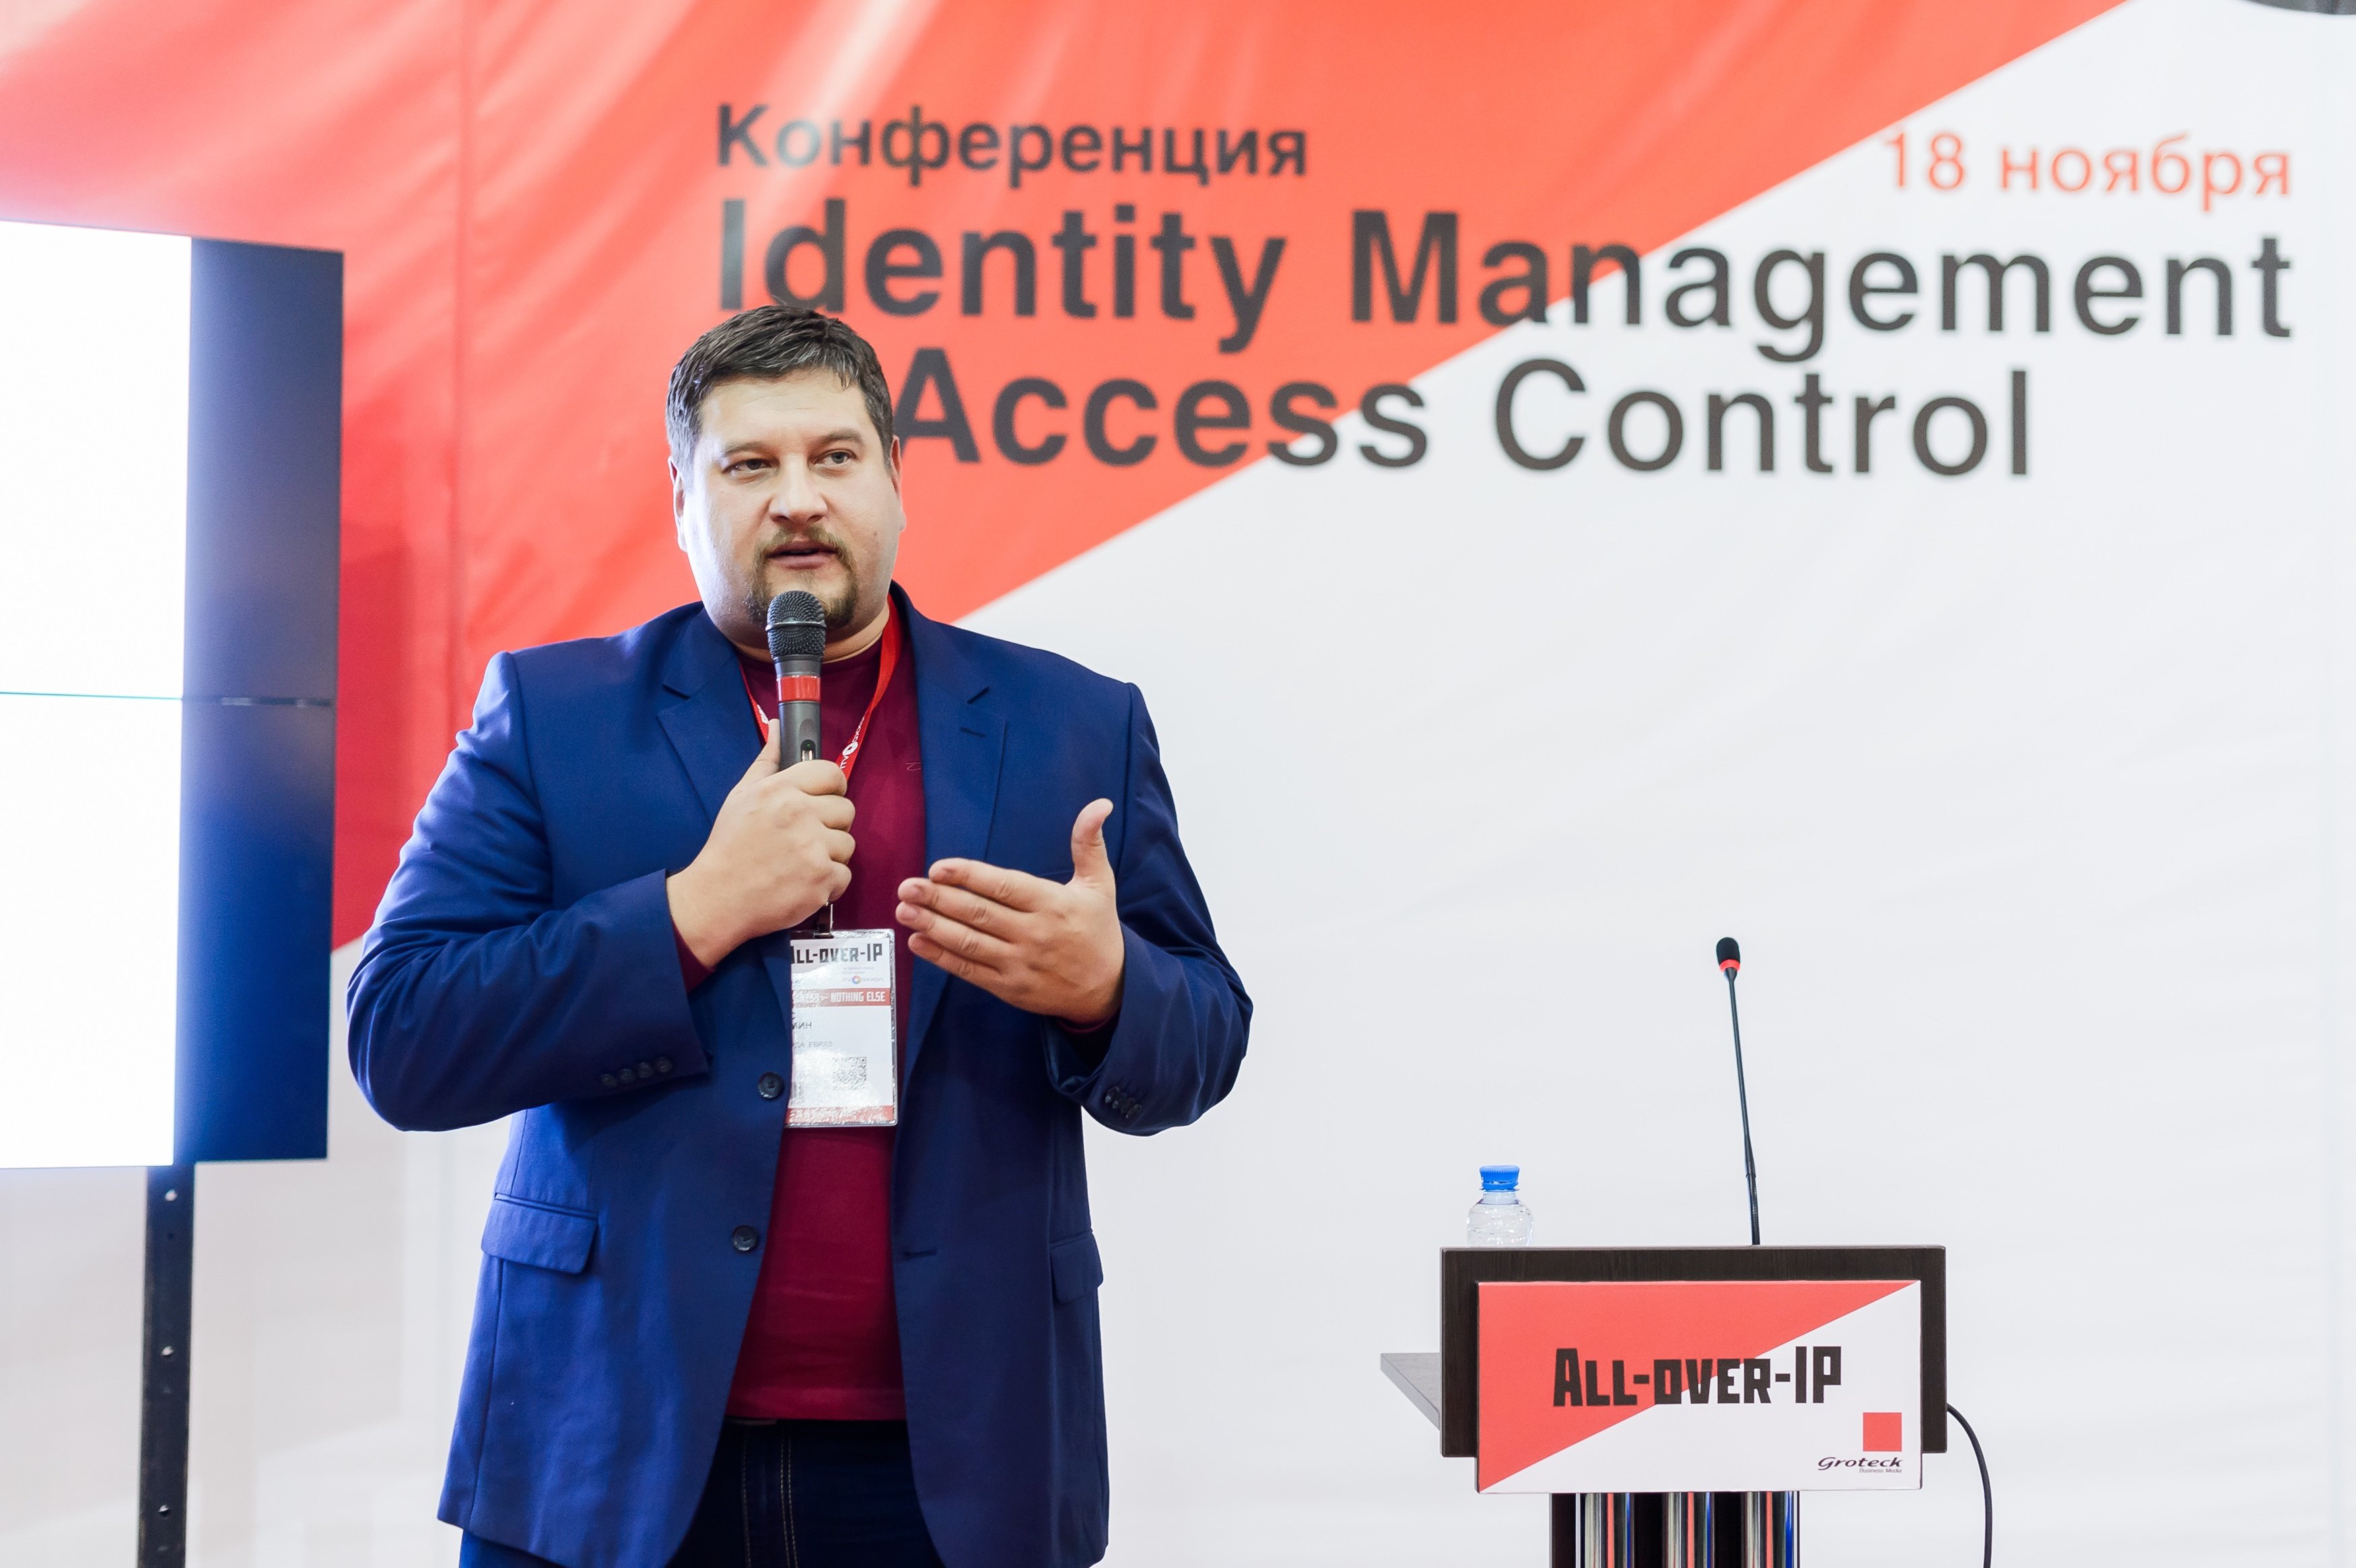 15 Trends for Growing Access Control Business in Russia in 2016-2017